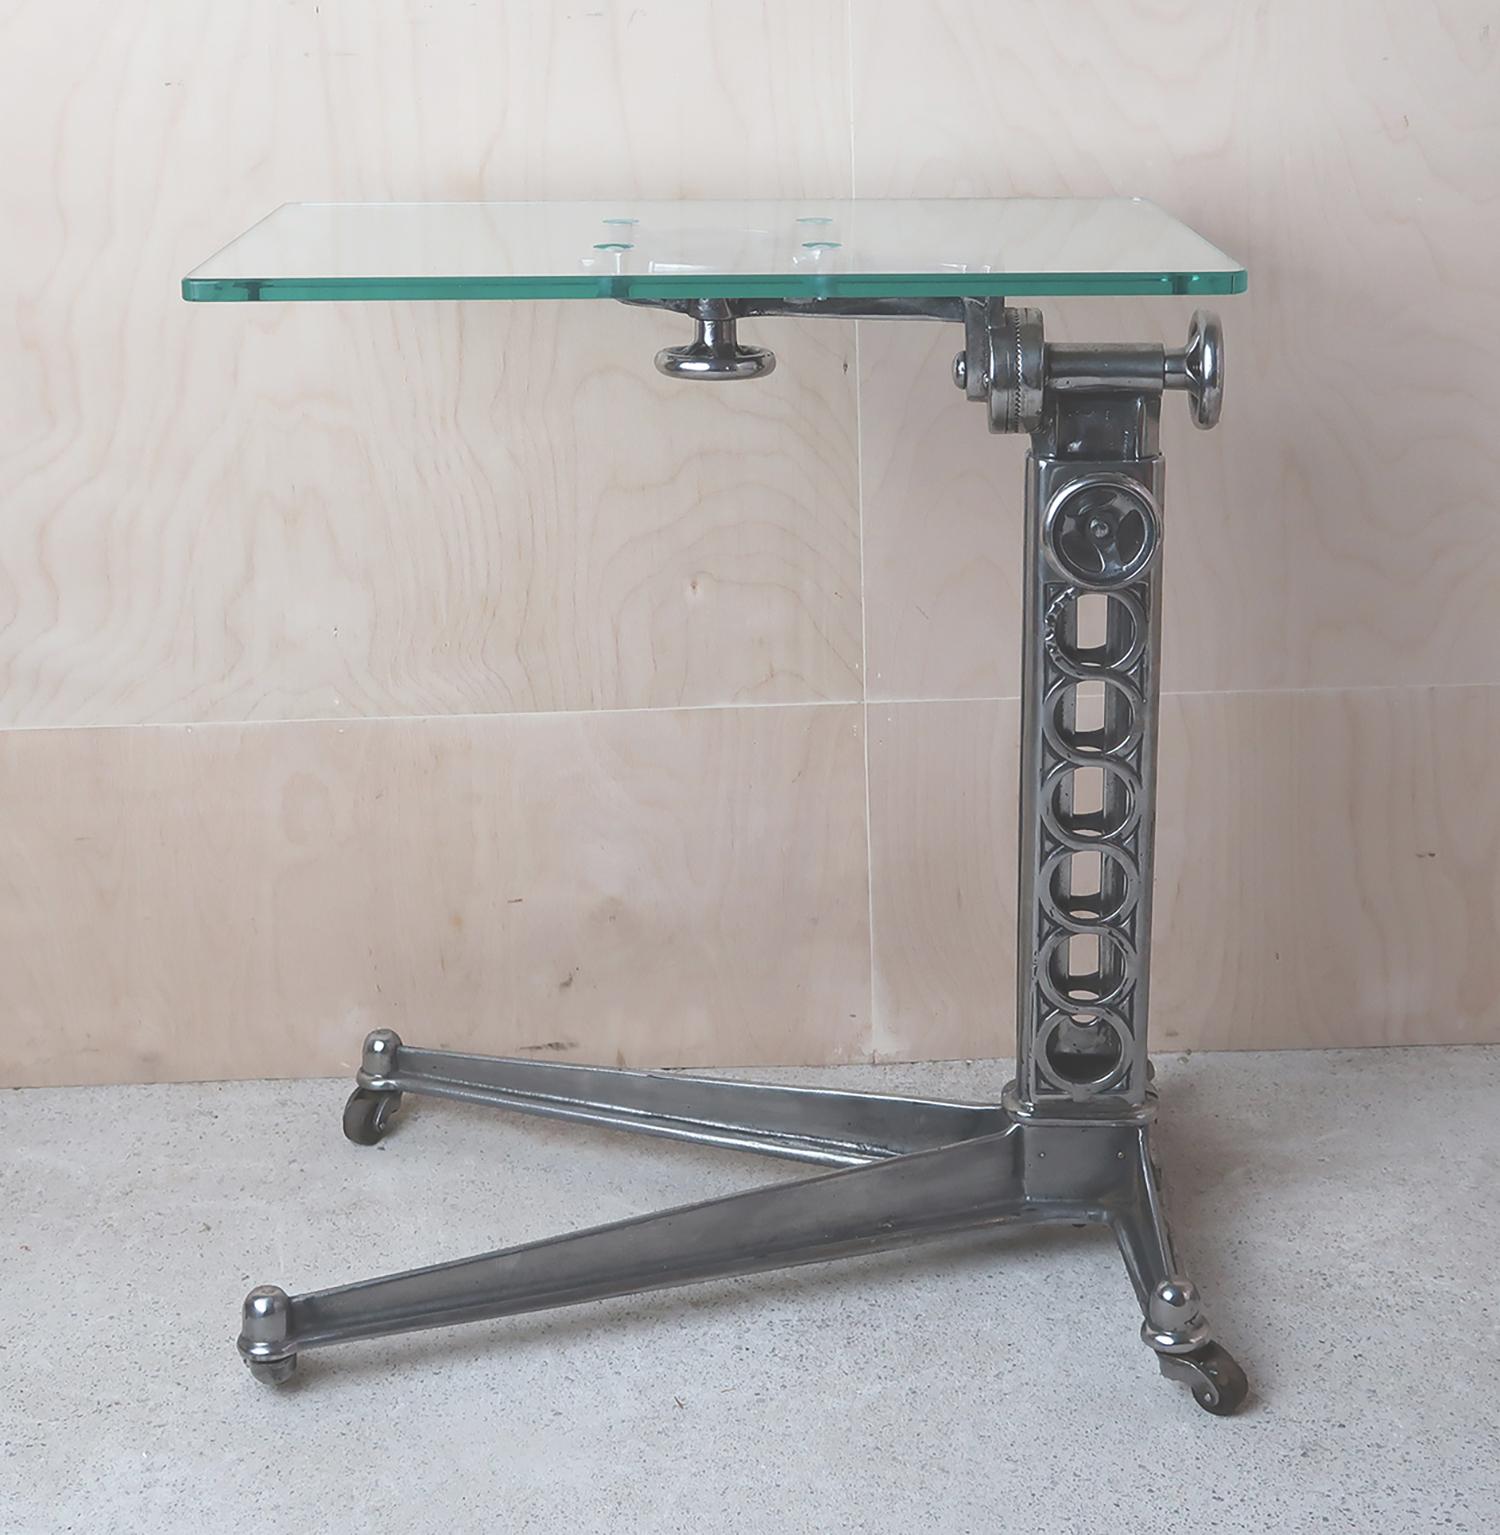 Stylish side or work table with an elegant Industrial look.

Made of cast iron (recently highly polished) with a new toughened glass top.

On original pot castors the table is easily pushed around the room.

The top is adjustable to a maximum of 36